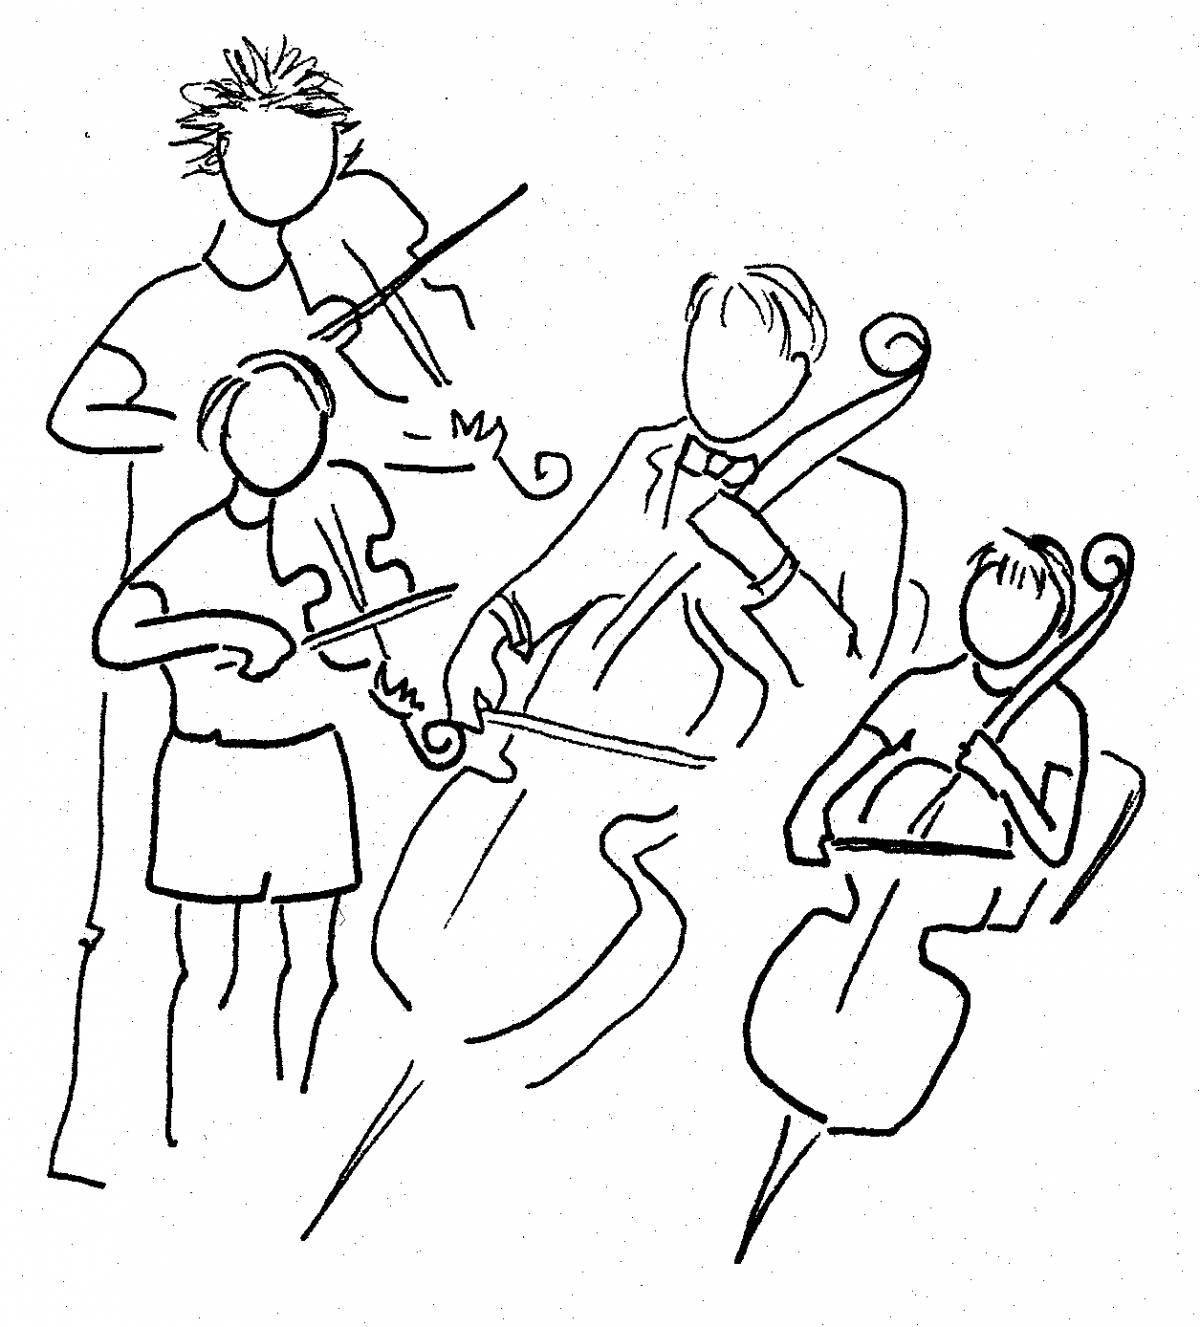 Glitter orchestra coloring page for kids